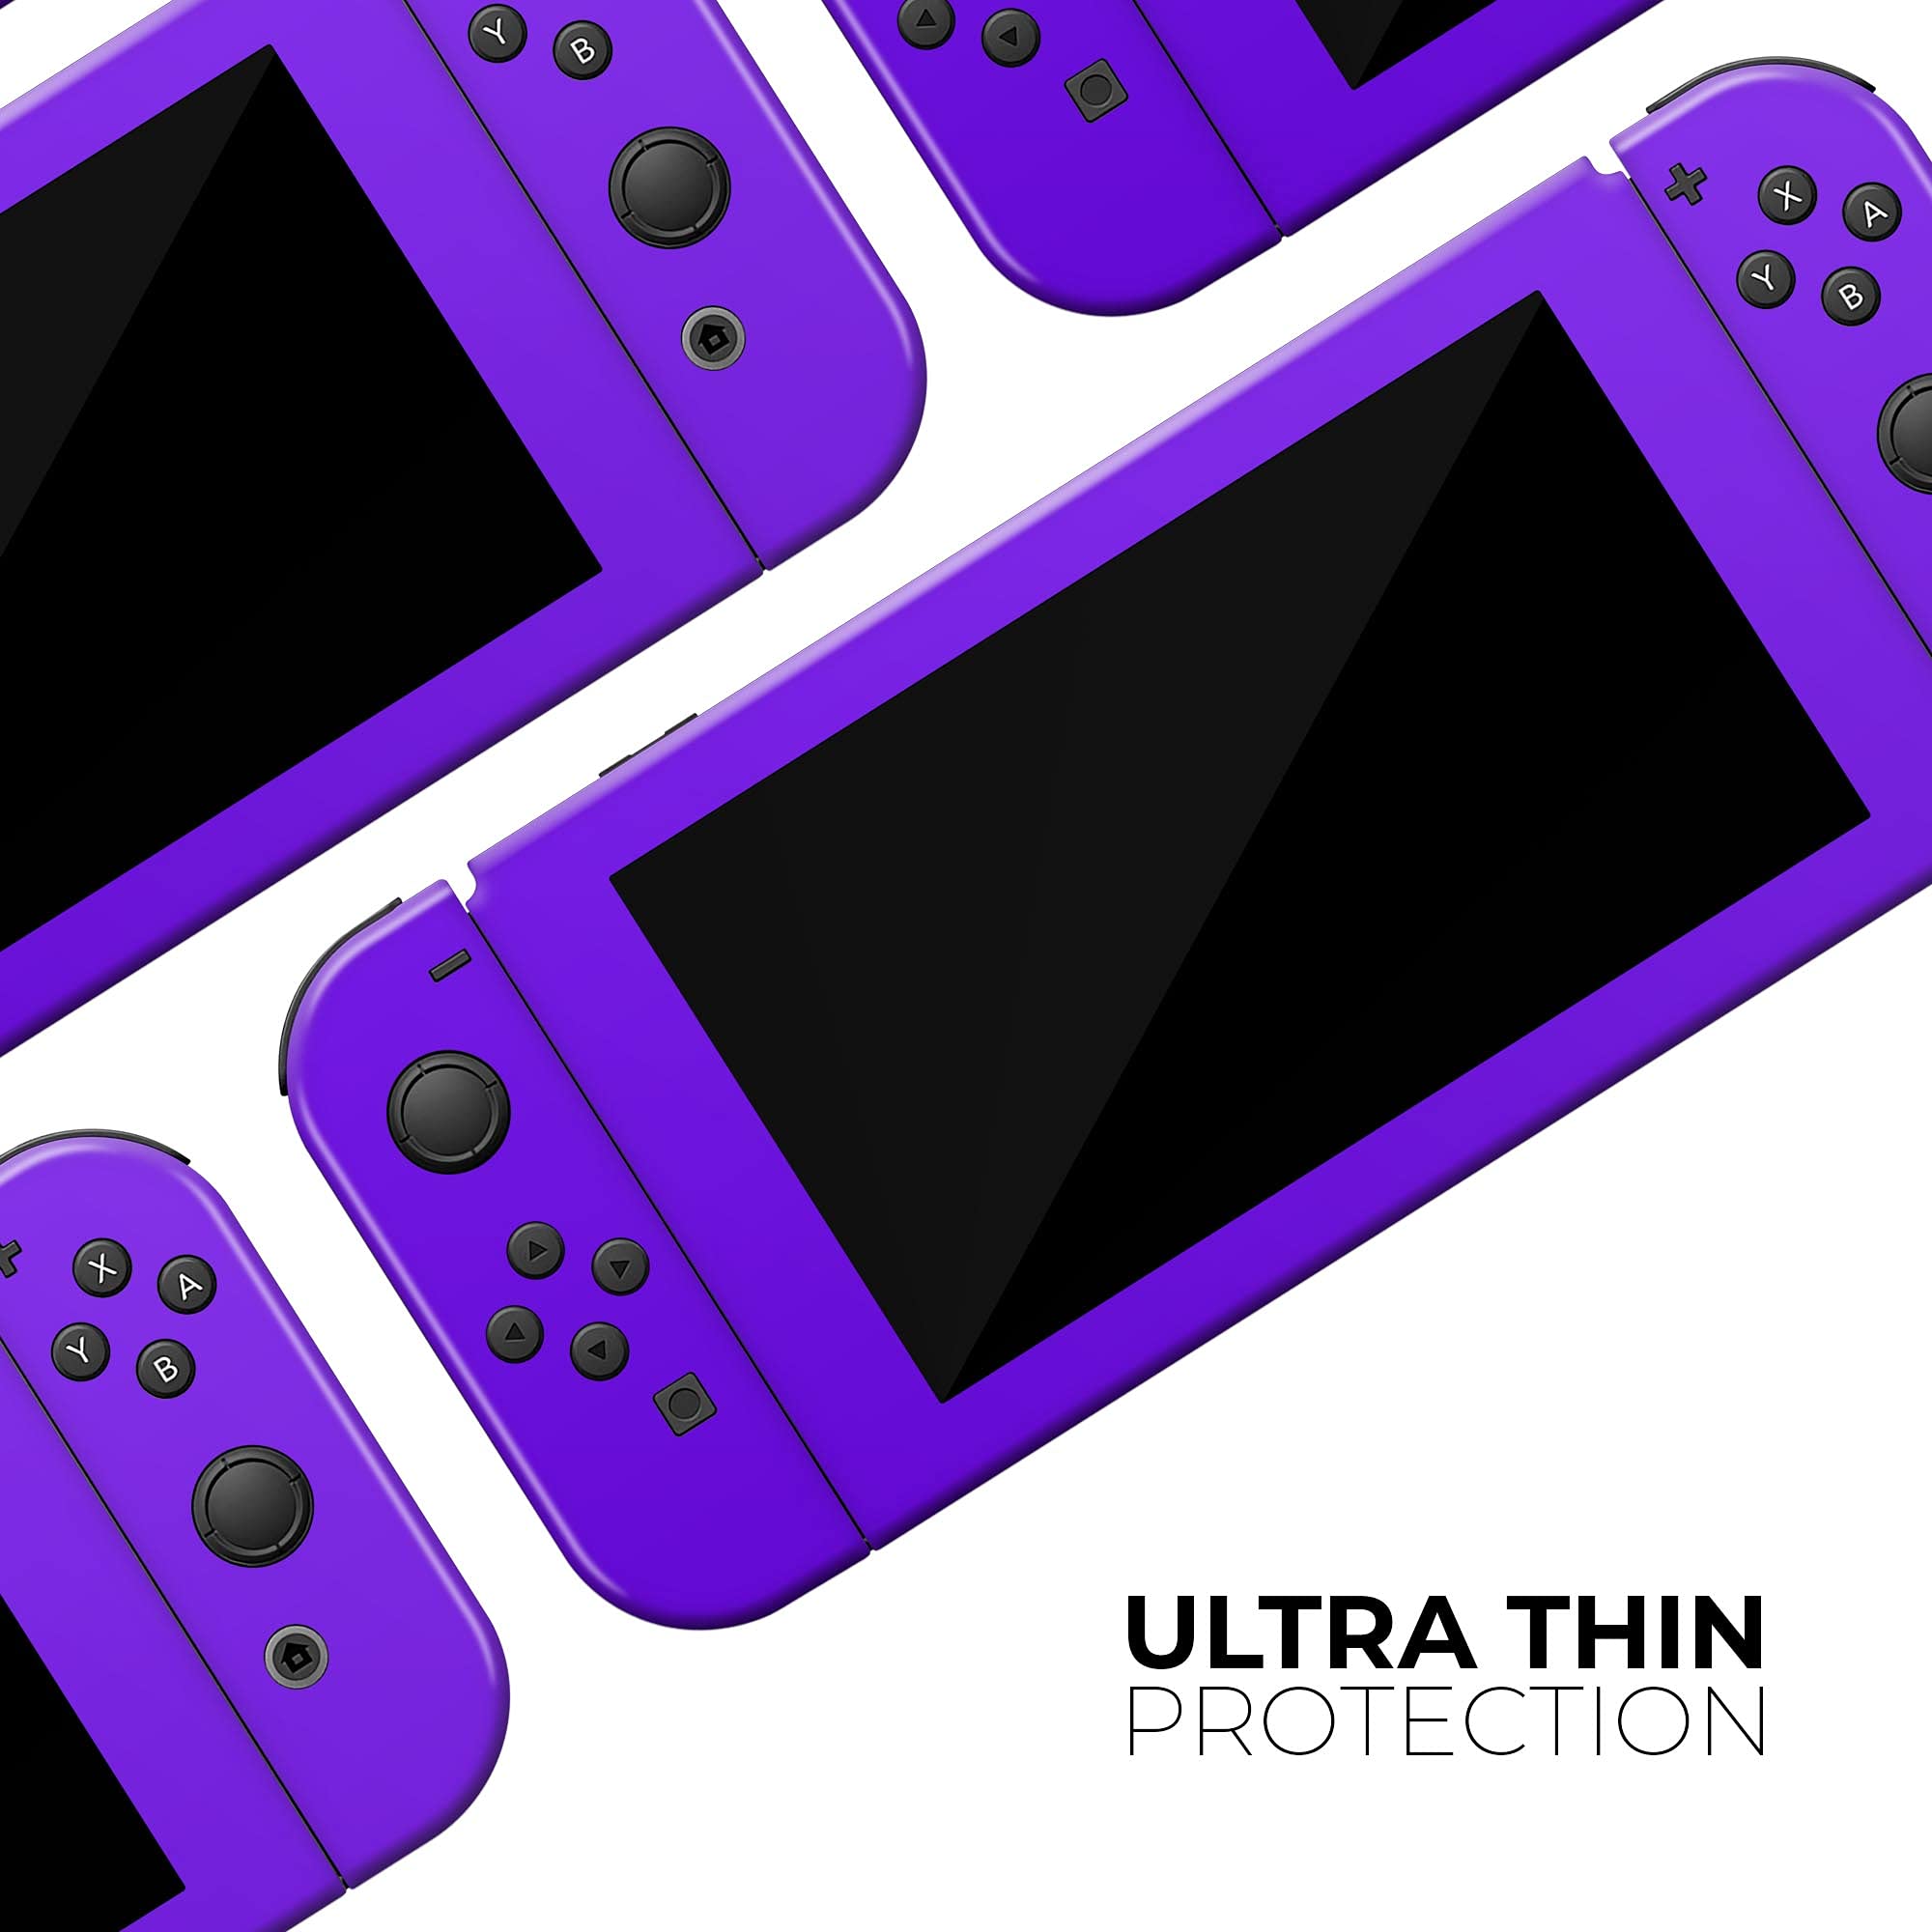 Design Skinz - Compatible with Nintendo Switch OLED Console Bundle - Skin Decal Protective Scratch-Resistant Removable Vinyl Wrap Cover - Solid Purple